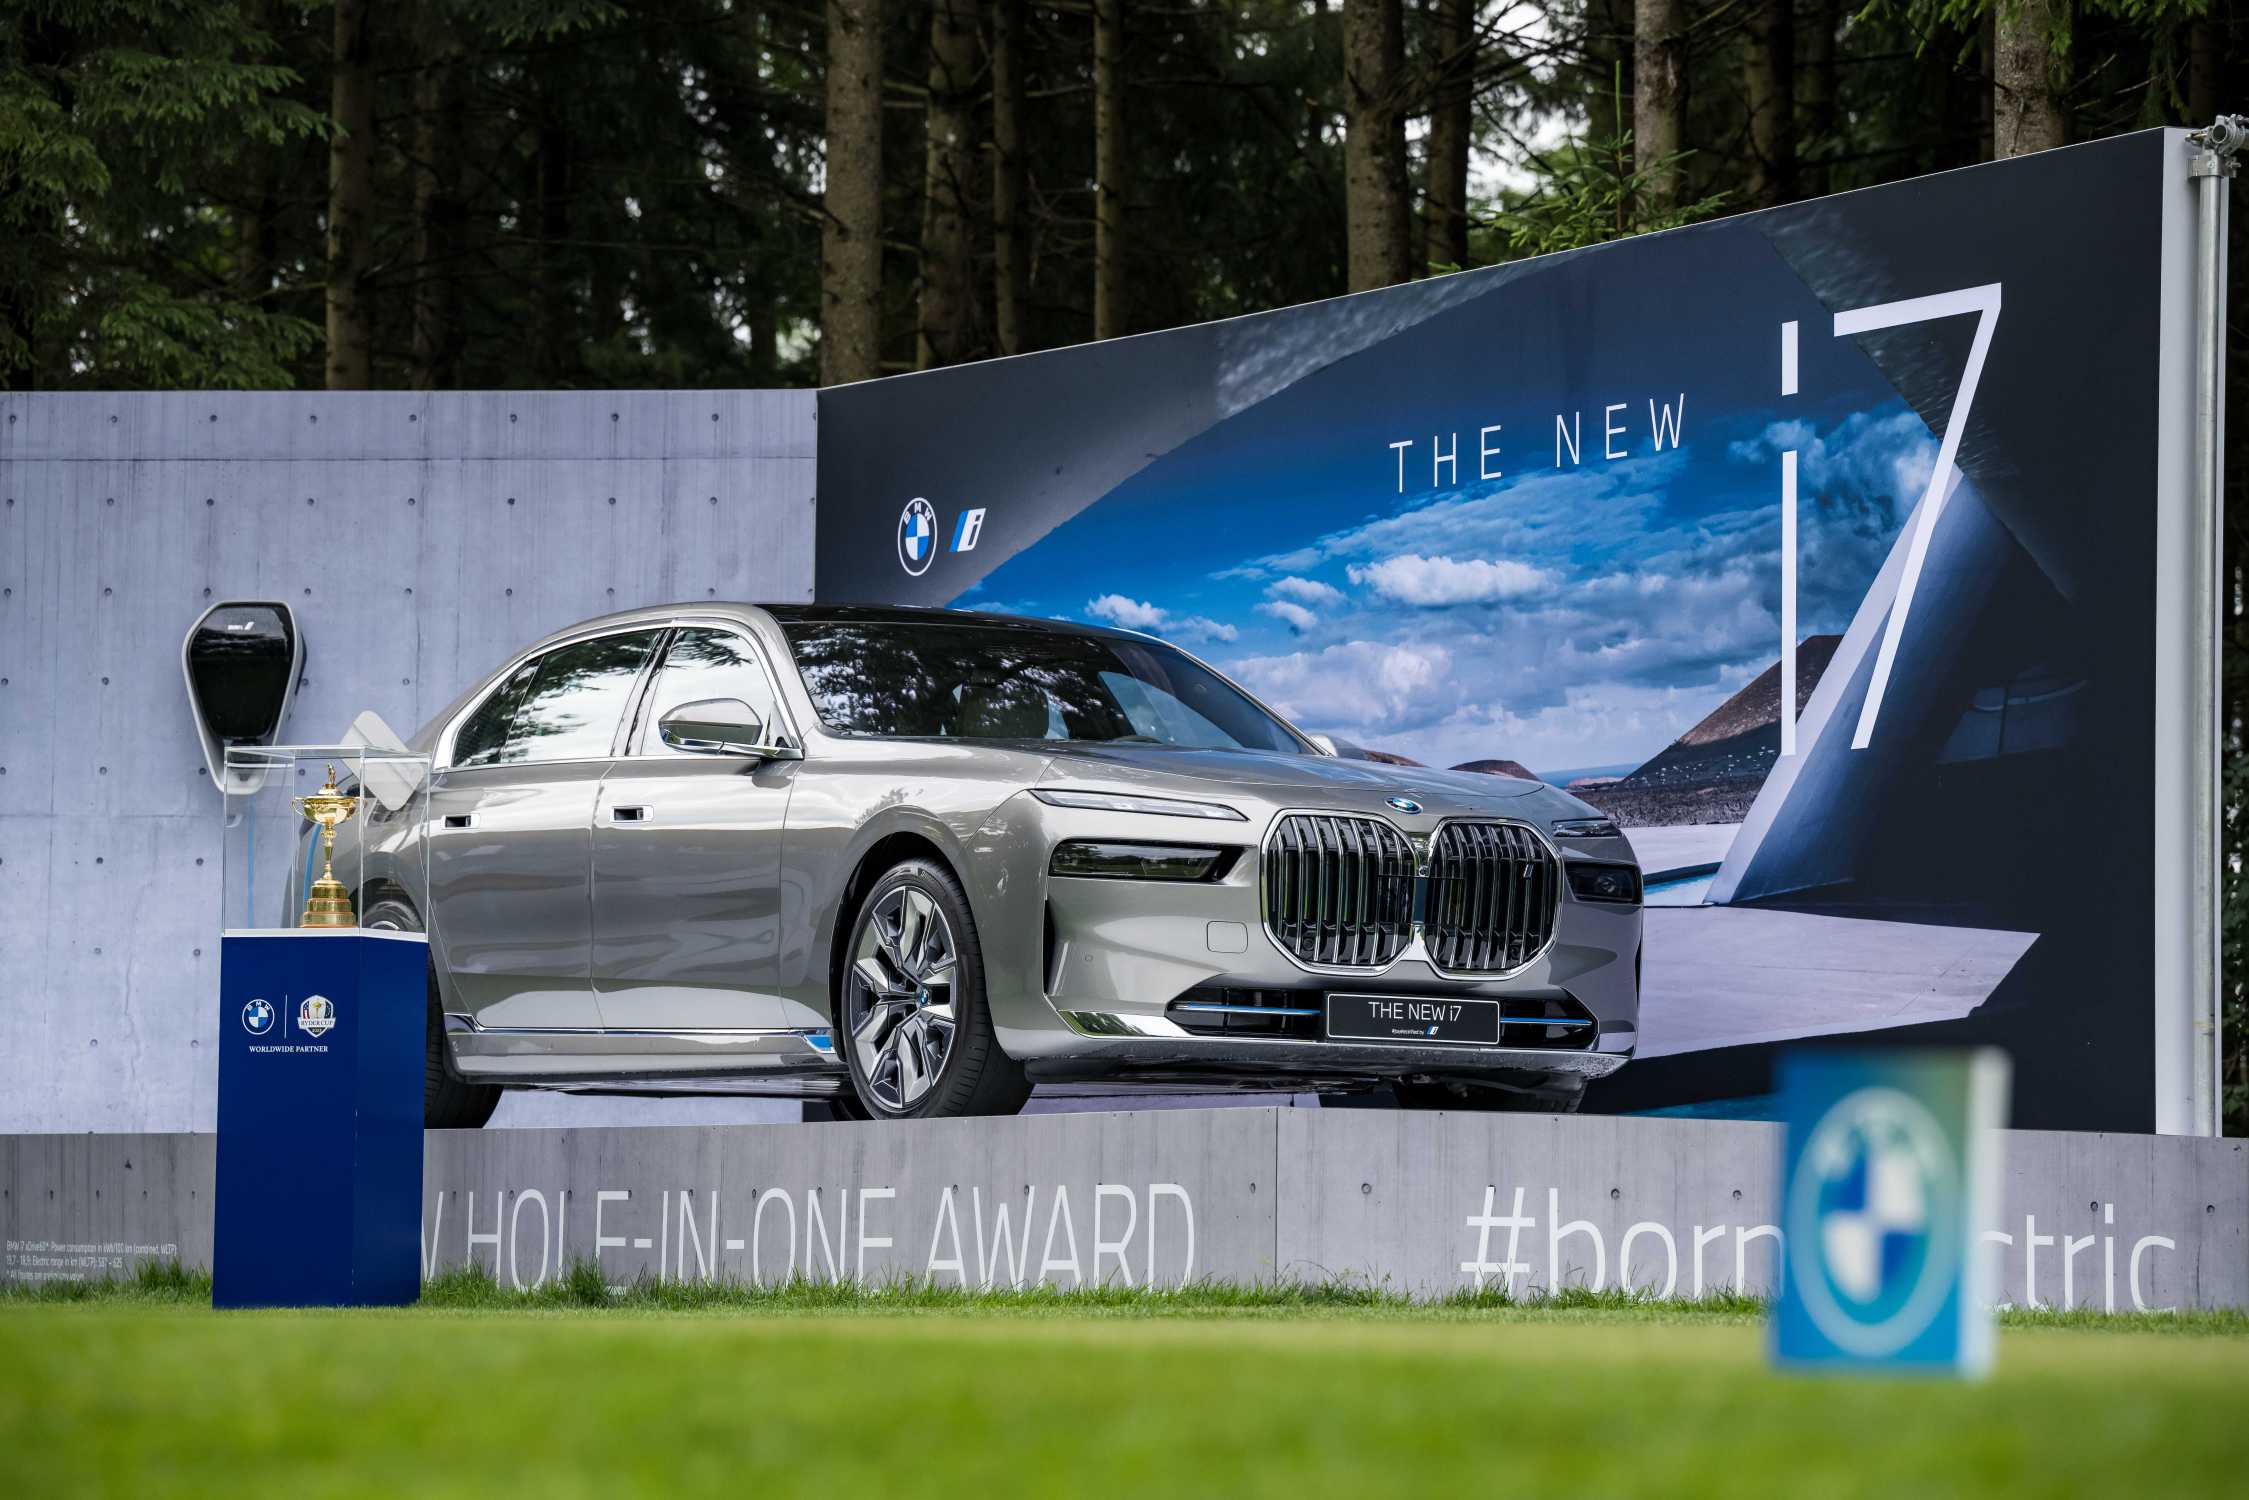 BMW International Open: The first all-electric BMW 7 Series in history is the 2022 Hole-in-One Award.